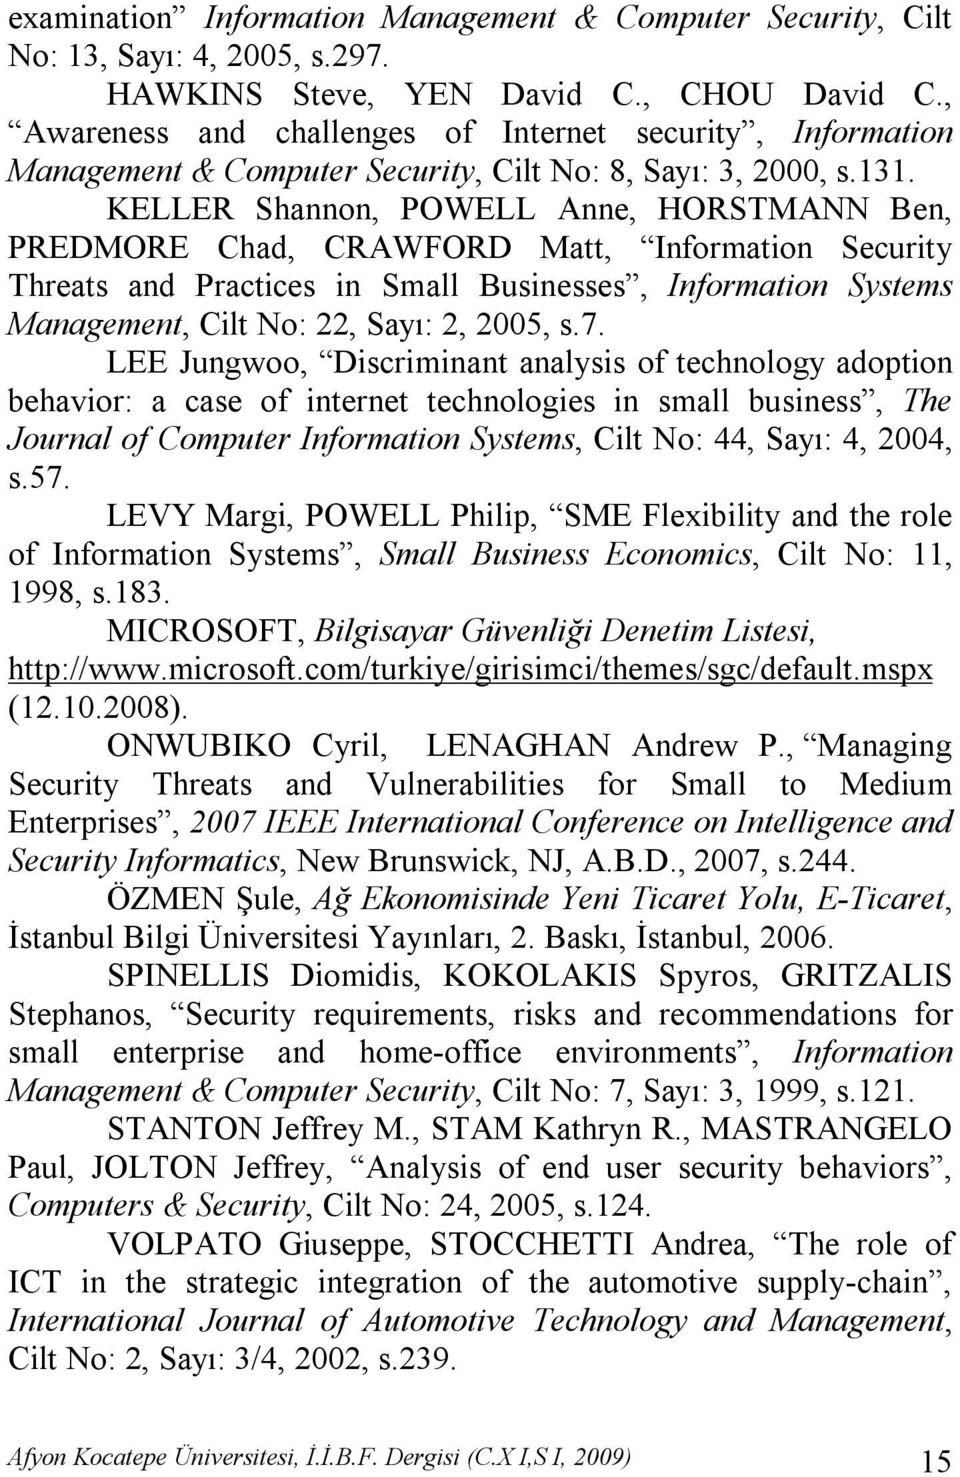 KELLER Shannon, POWELL Anne, HORSTMANN Ben, PREDMORE Chad, CRAWFORD Matt, Information Security Threats and Practices in Small Businesses, Information Systems Management, Cilt No: 22, Sayı: 2, 2005, s.